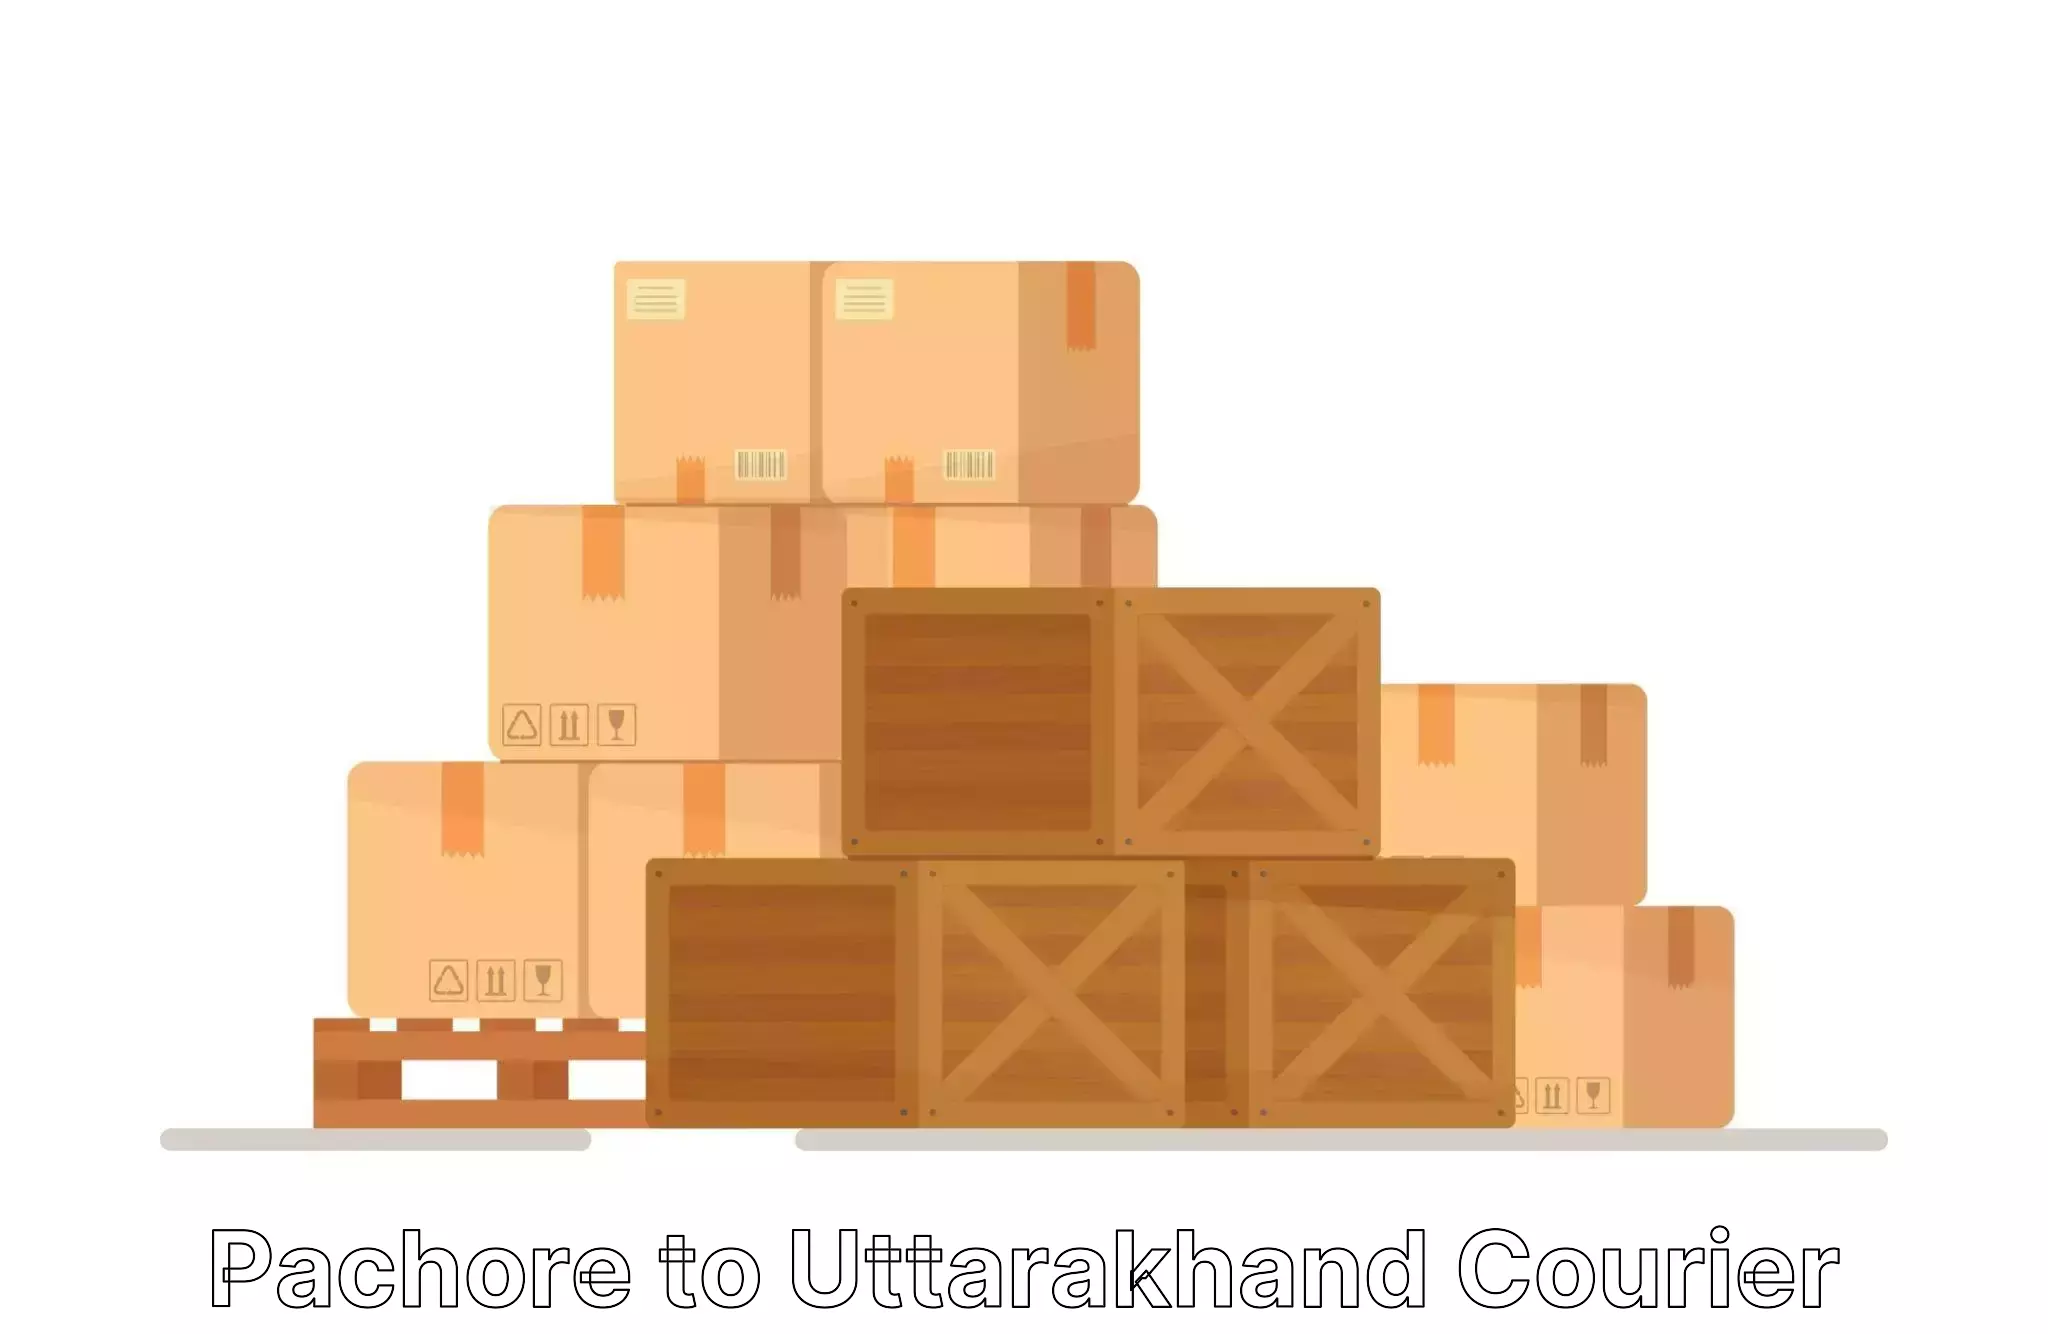 Moving and storage services Pachore to Uttarakhand